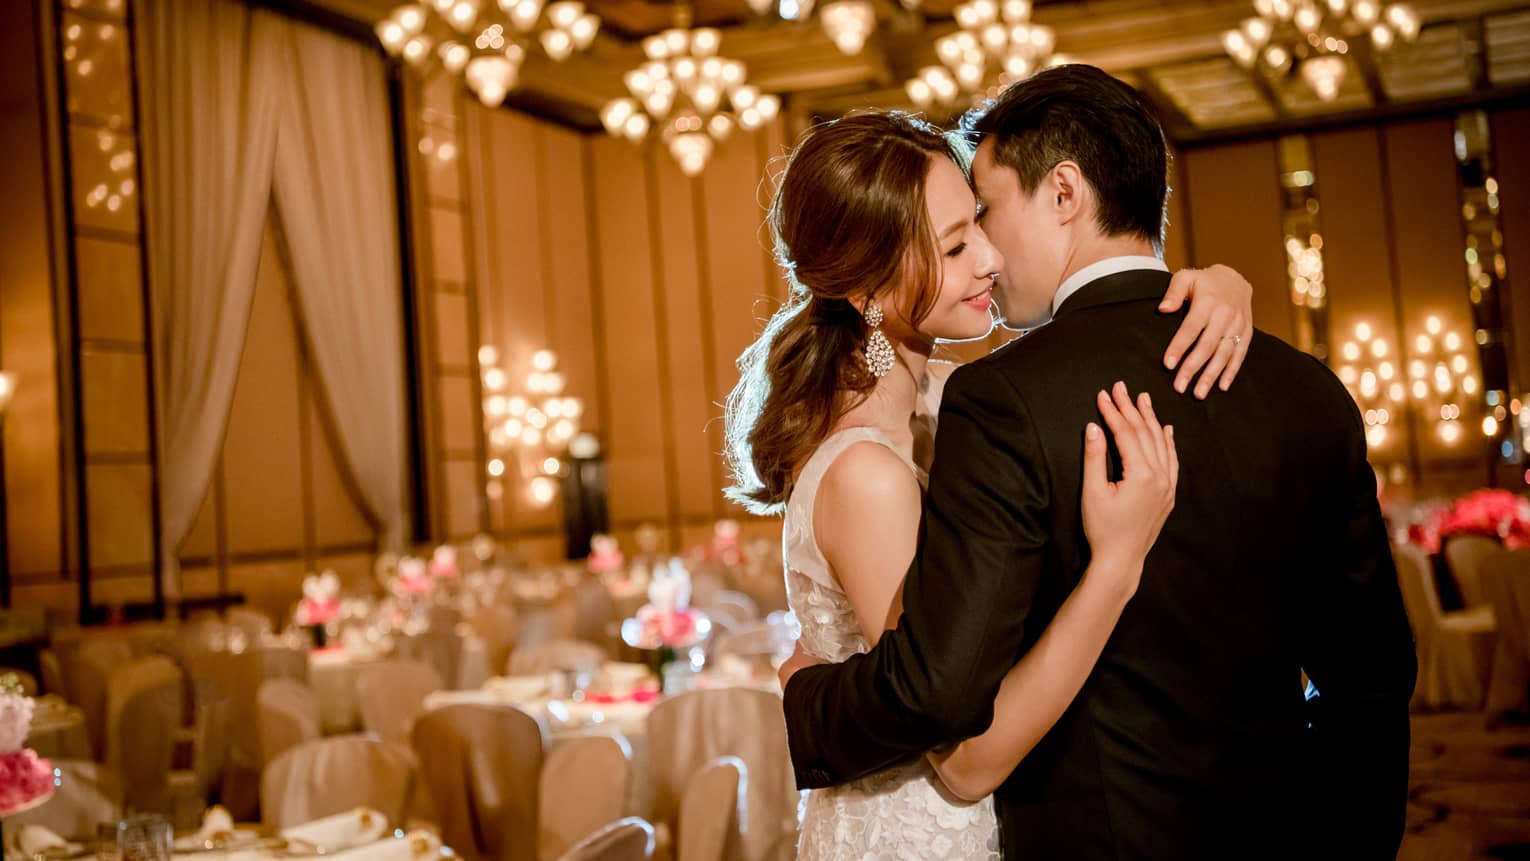 Bride and groom kiss, embrace in elegant ballroom with wedding reception banquet tables